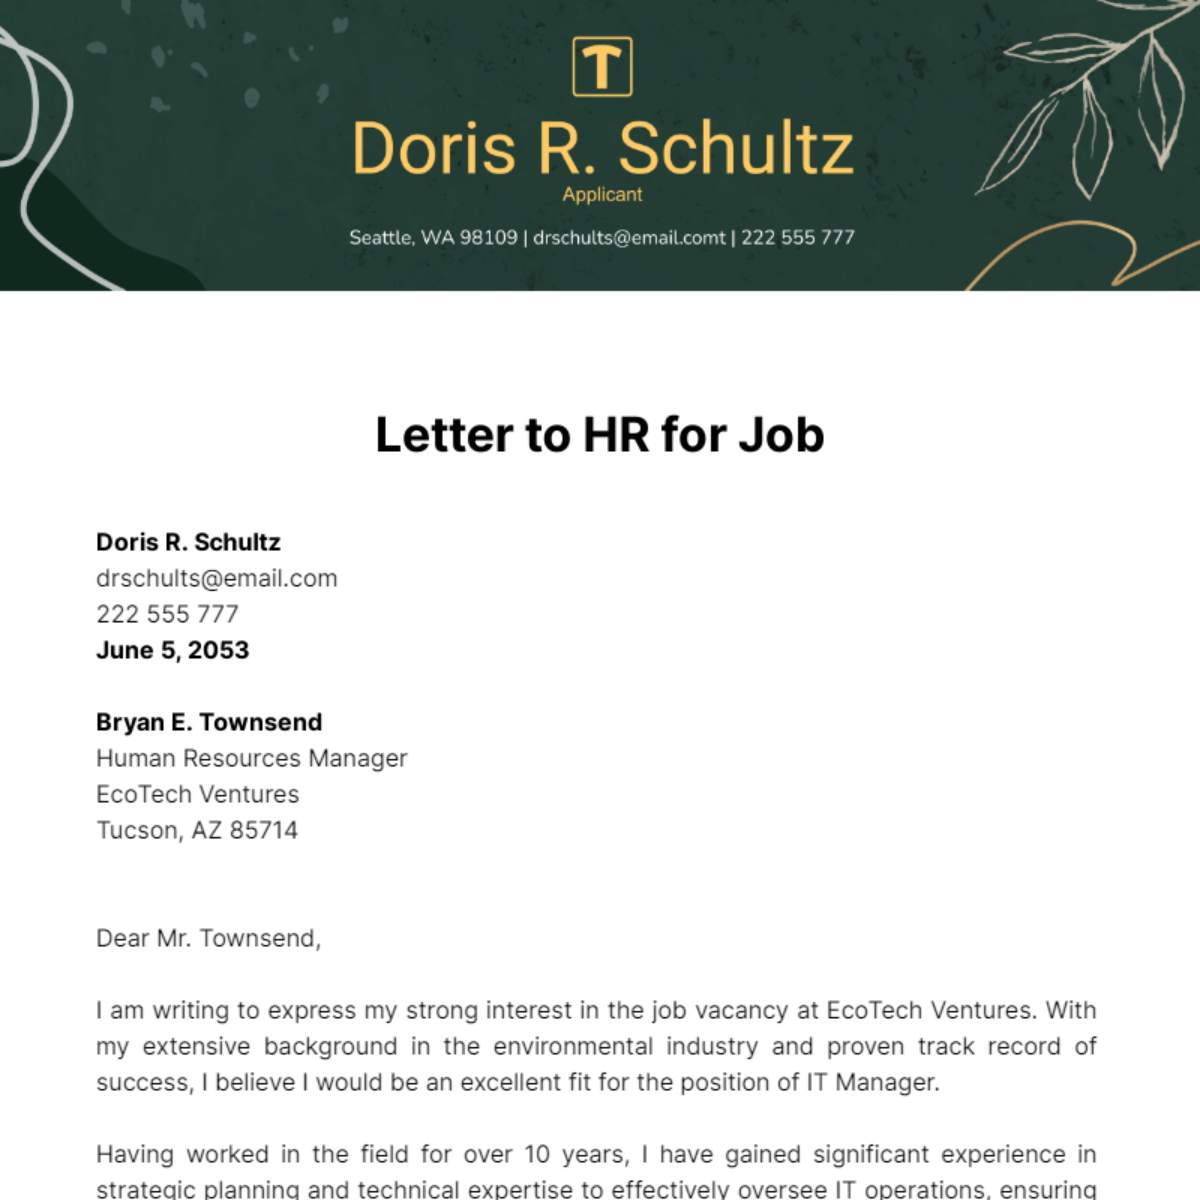 Letter to HR for Job Template